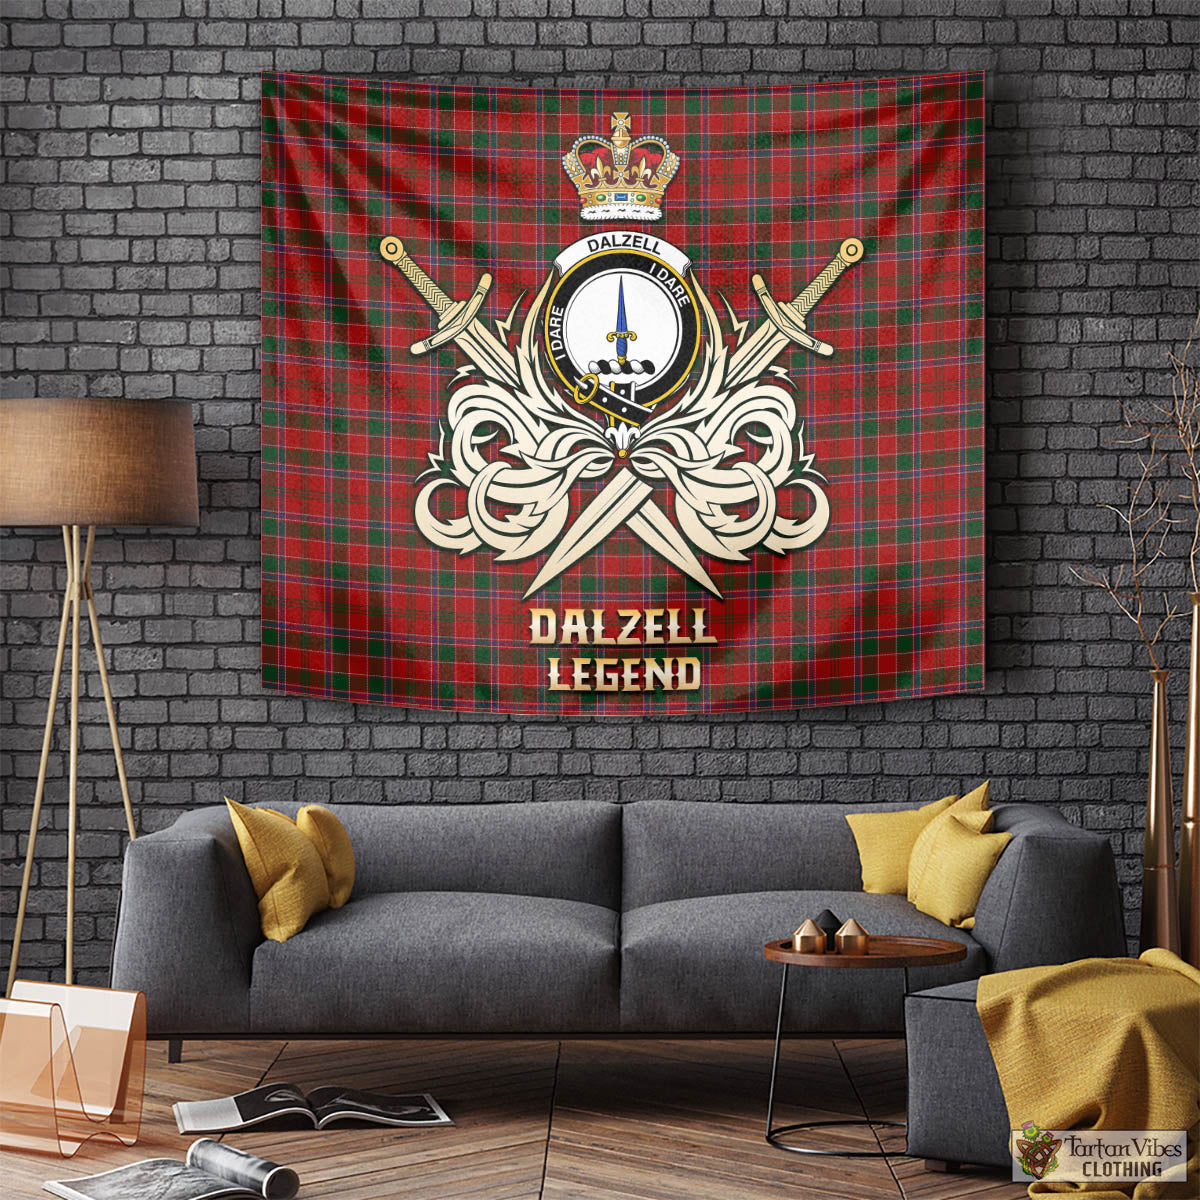 Tartan Vibes Clothing Dalzell (Dalziel) Tartan Tapestry with Clan Crest and the Golden Sword of Courageous Legacy